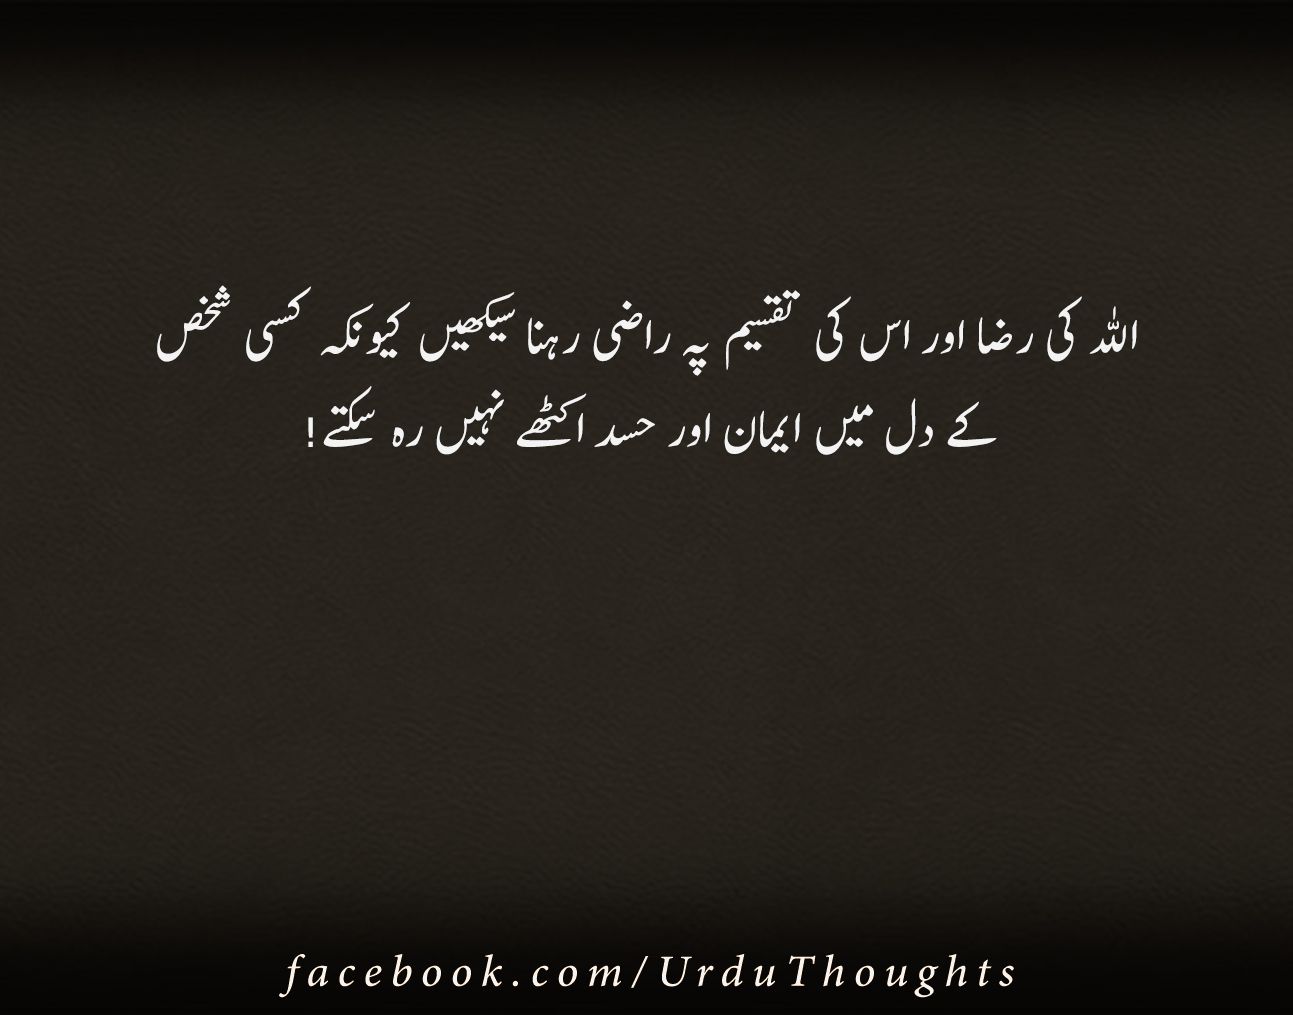 Urdu Thoughts Black Background Quotes Image